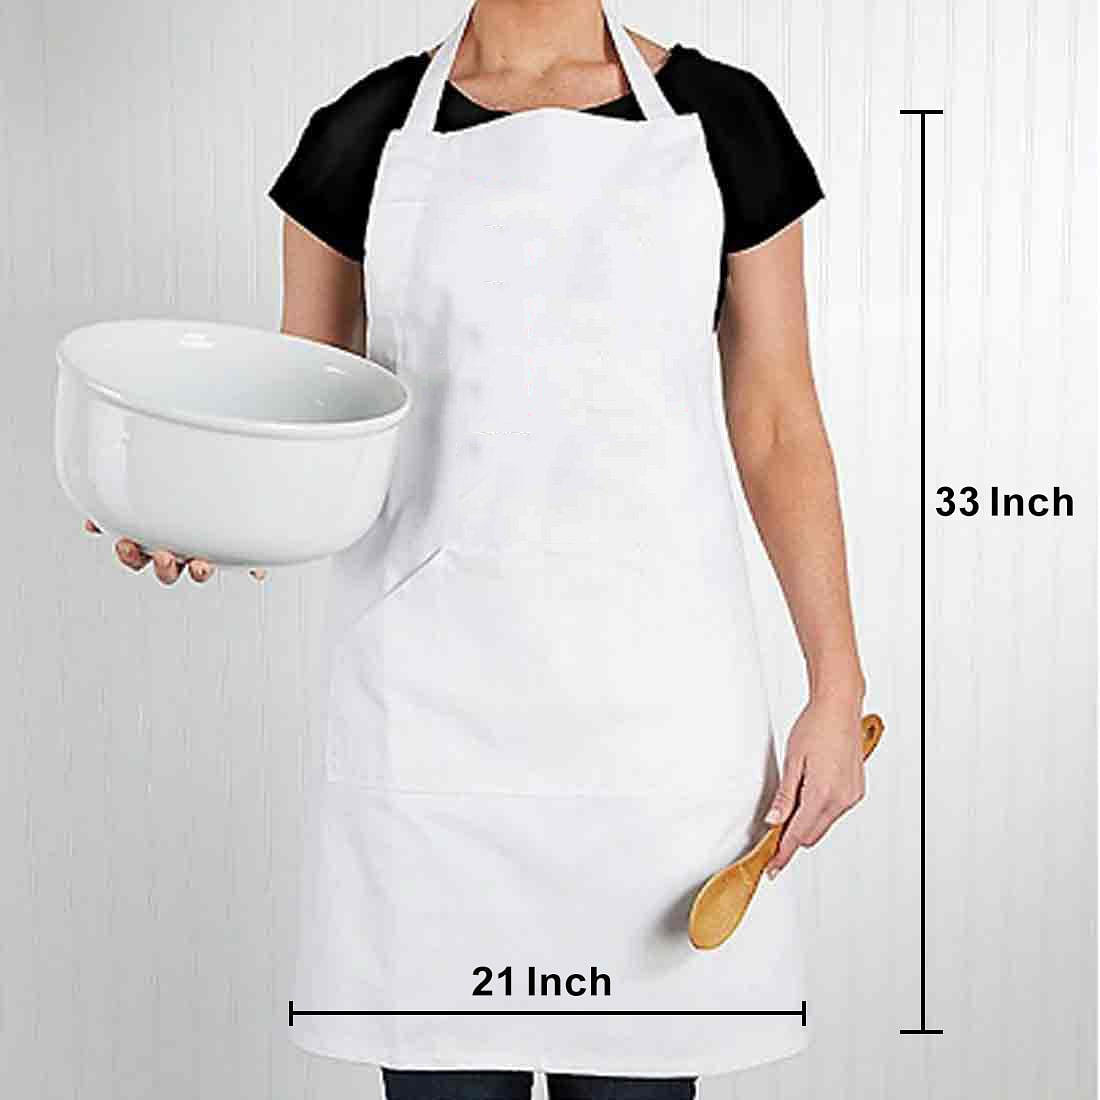 Apron For Kitchen for Women Baking Cooking - Bakers Gonna Bake Nutcase